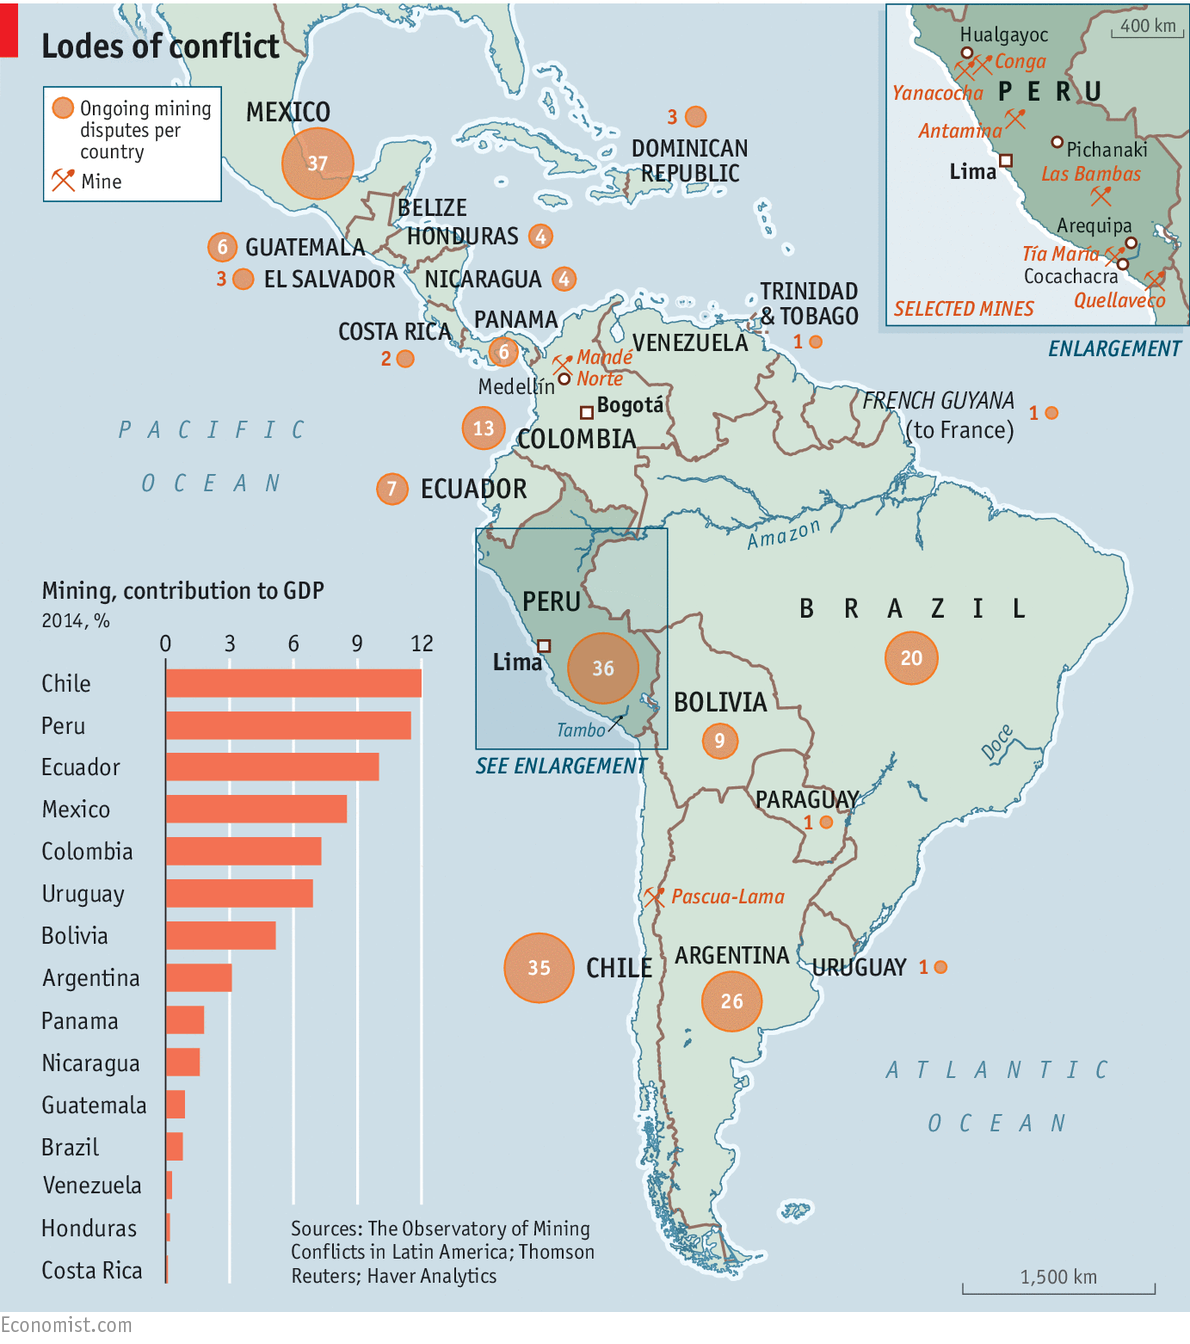 Disputes over mining operations within Latin American countries. Taken from The Economist. 